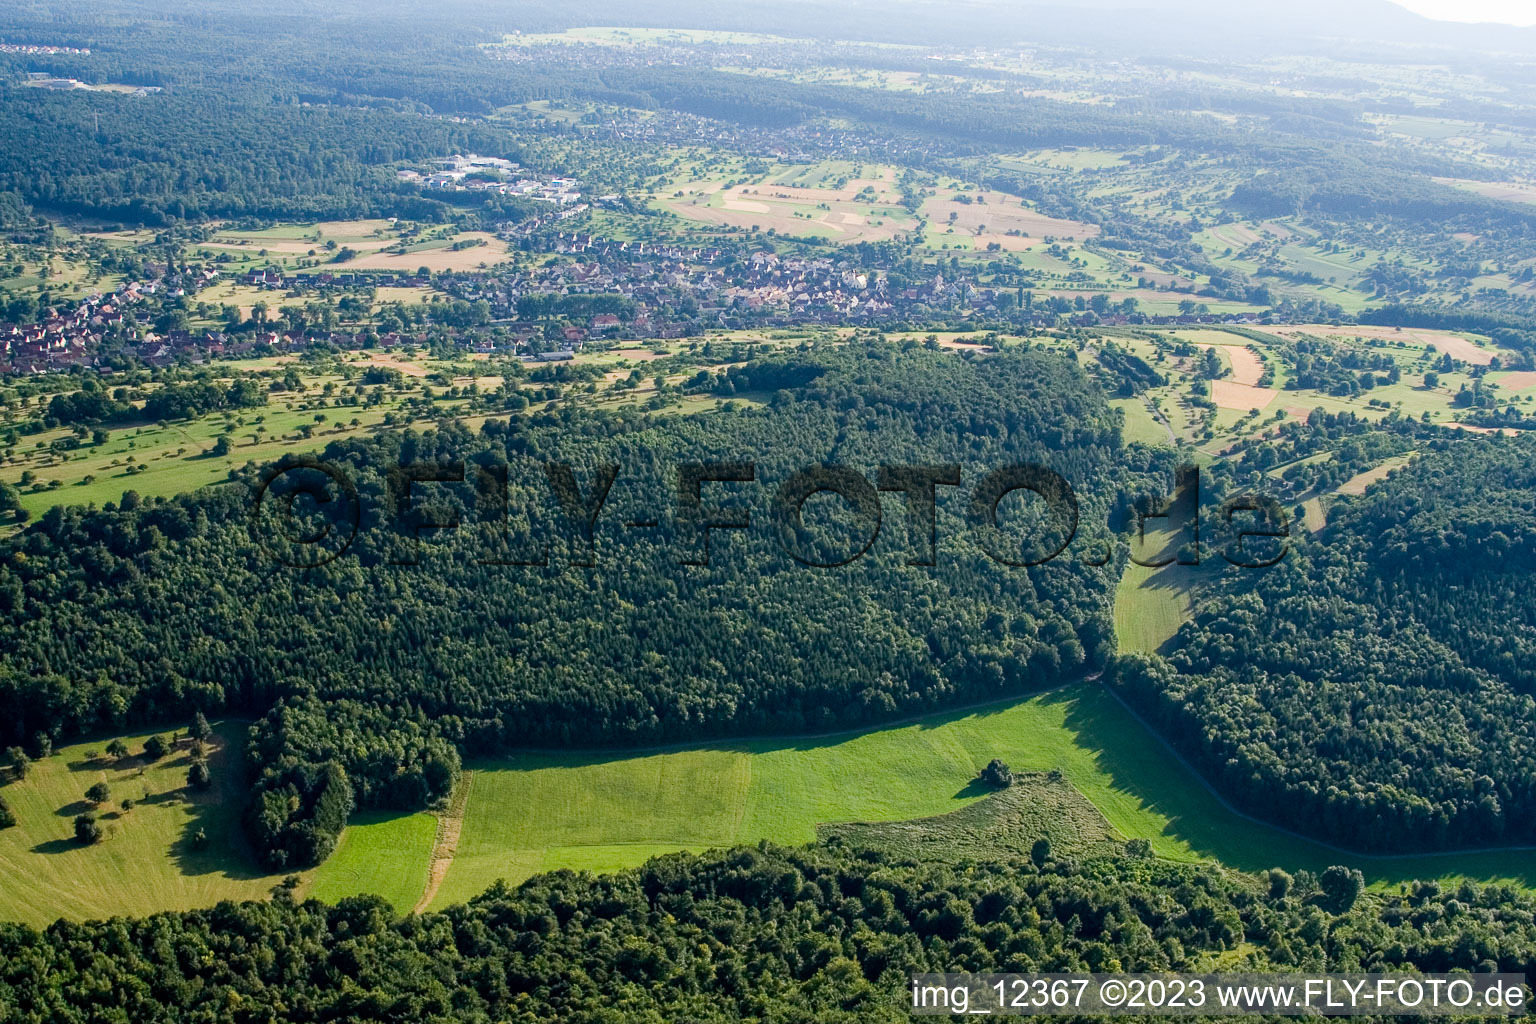 Kettelbachtal nature reserve in Gräfenhausen in the state Baden-Wuerttemberg, Germany seen from a drone